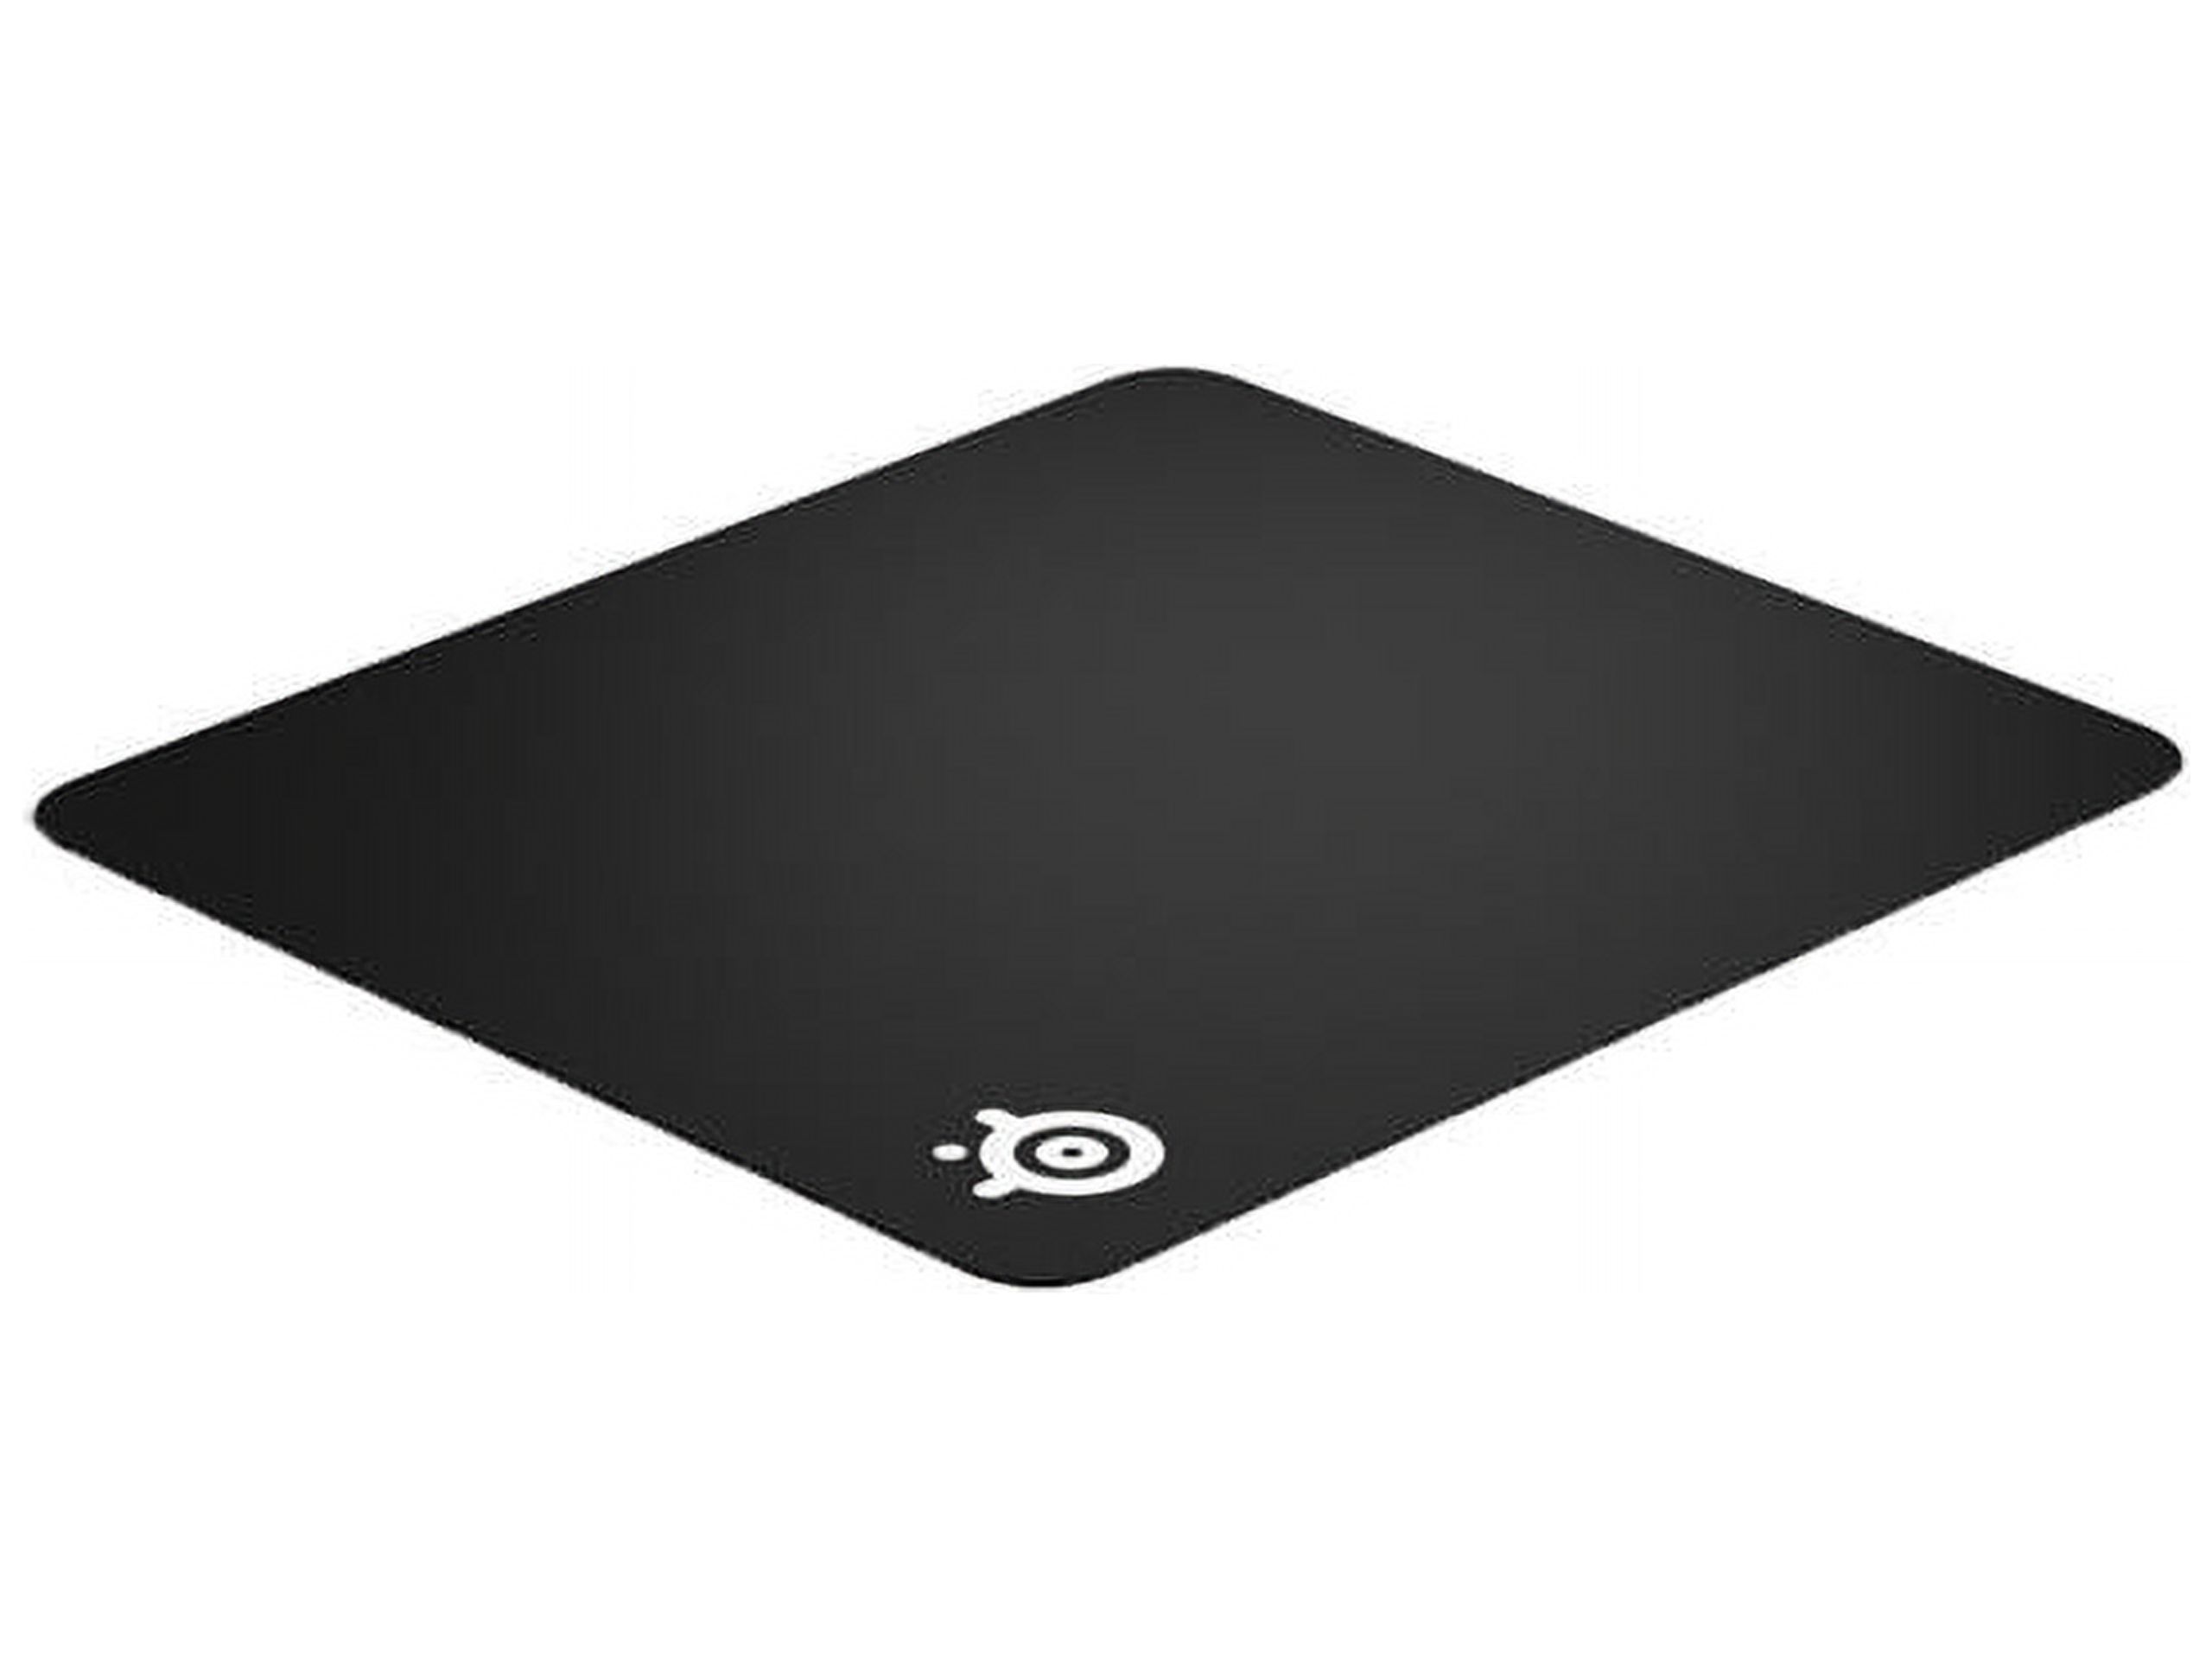 SteelSeries QcK+ Mouse Pad - image 5 of 6